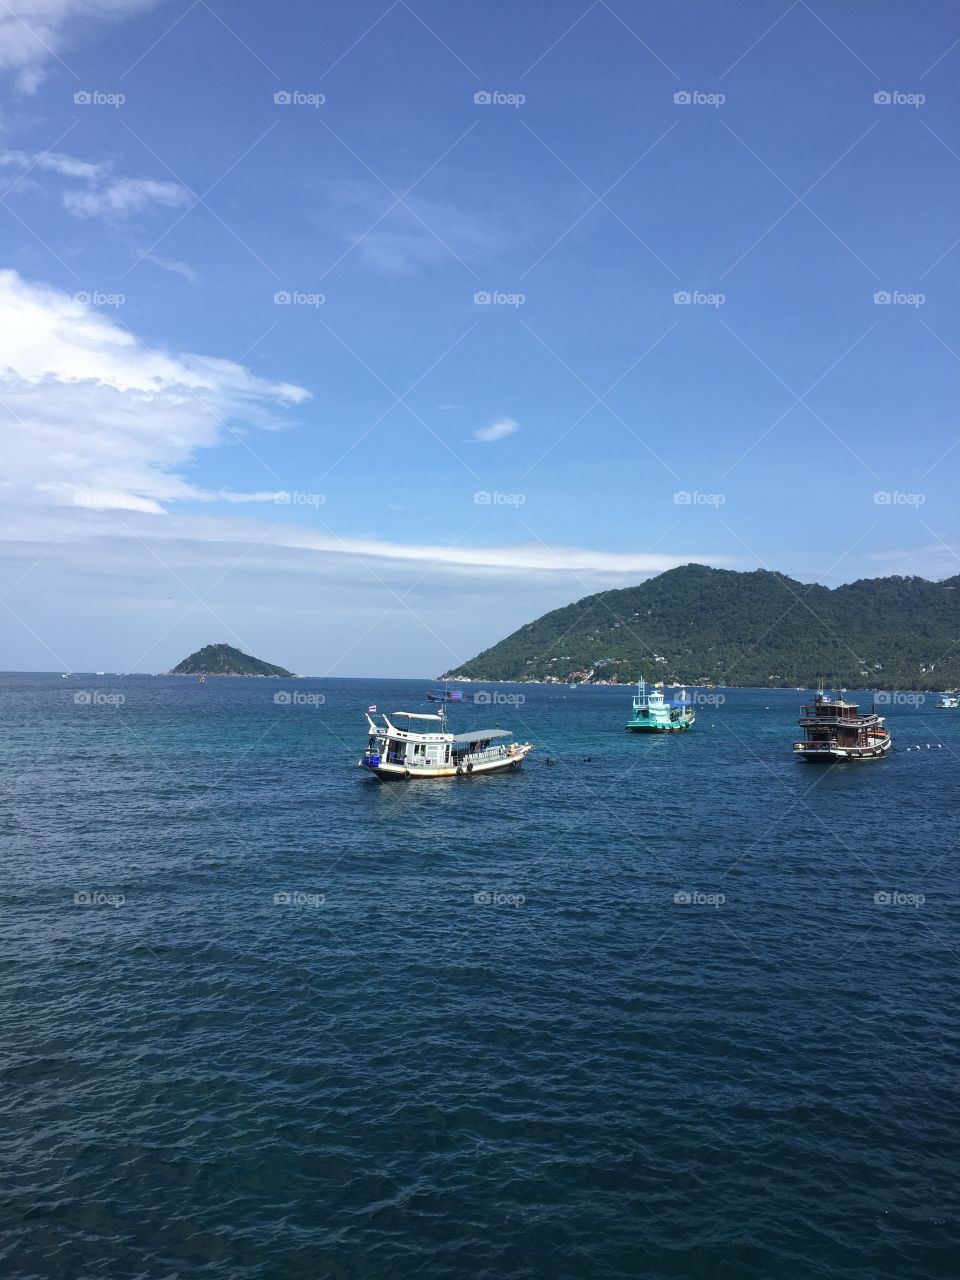 Thailand islands are the best, blue seas and skies. Mountains on the horizon and no pollution 